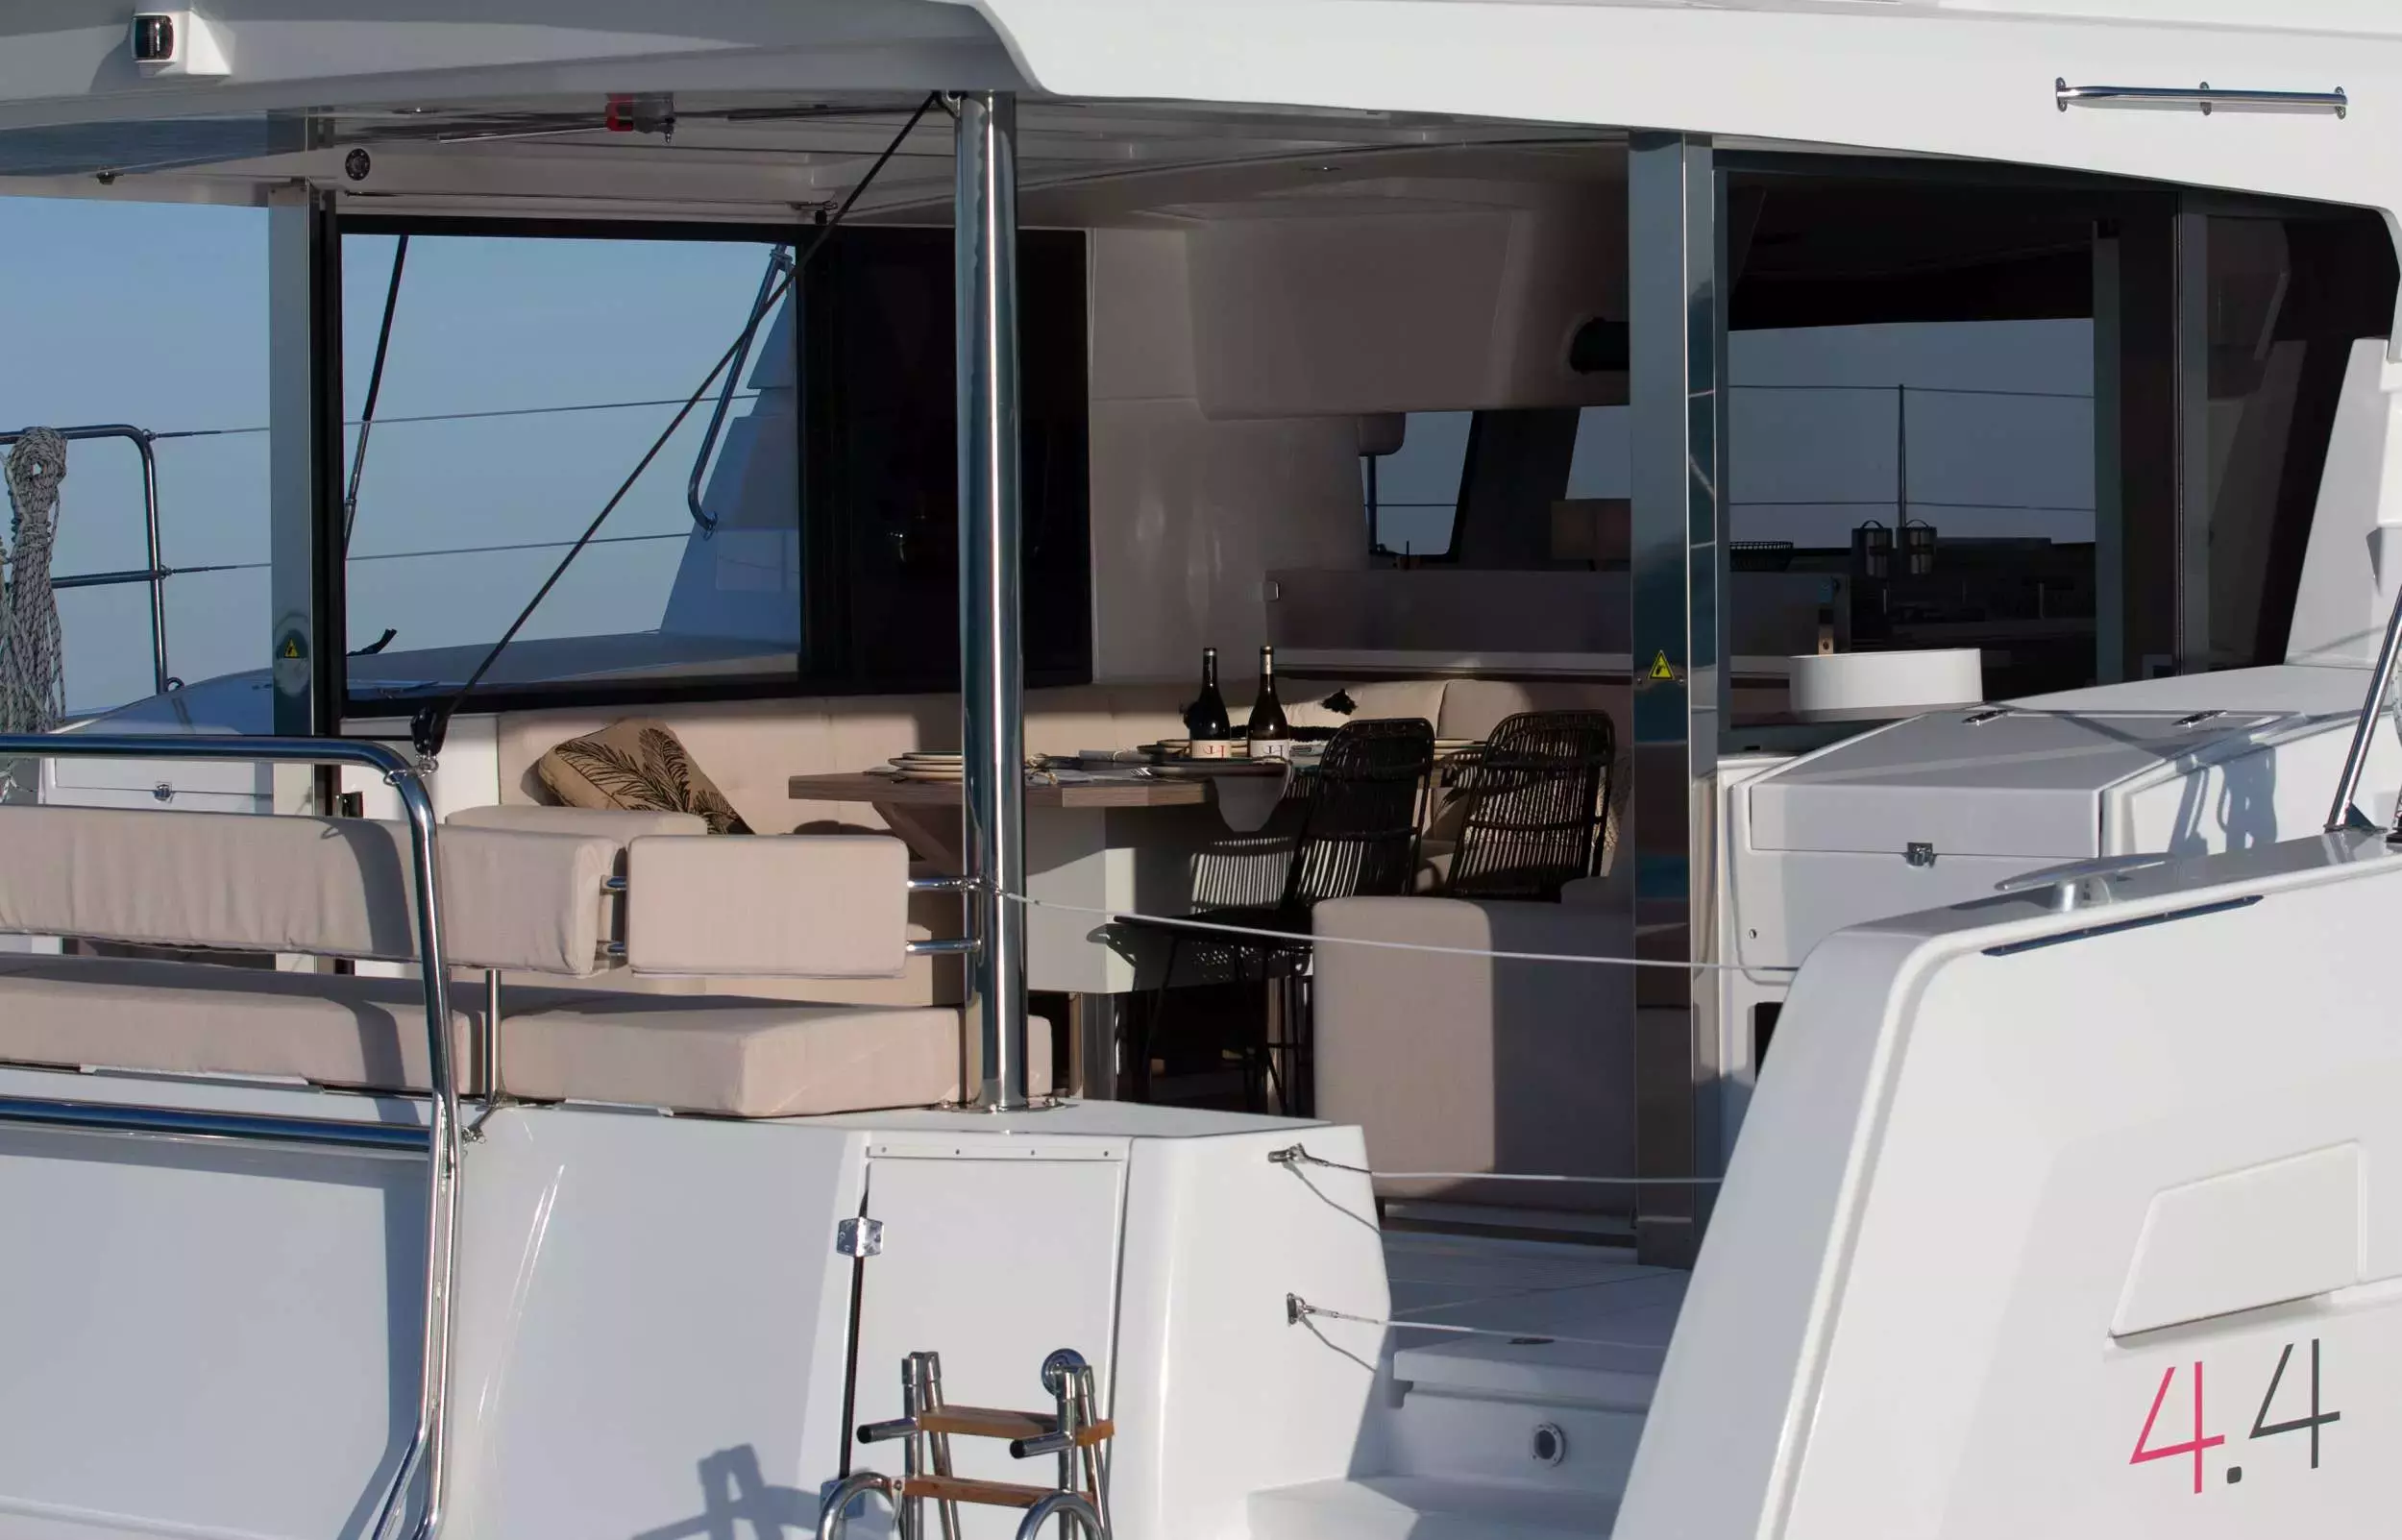 Said by Bali Catamarans - Special Offer for a private Sailing Catamaran Rental in Denia with a crew